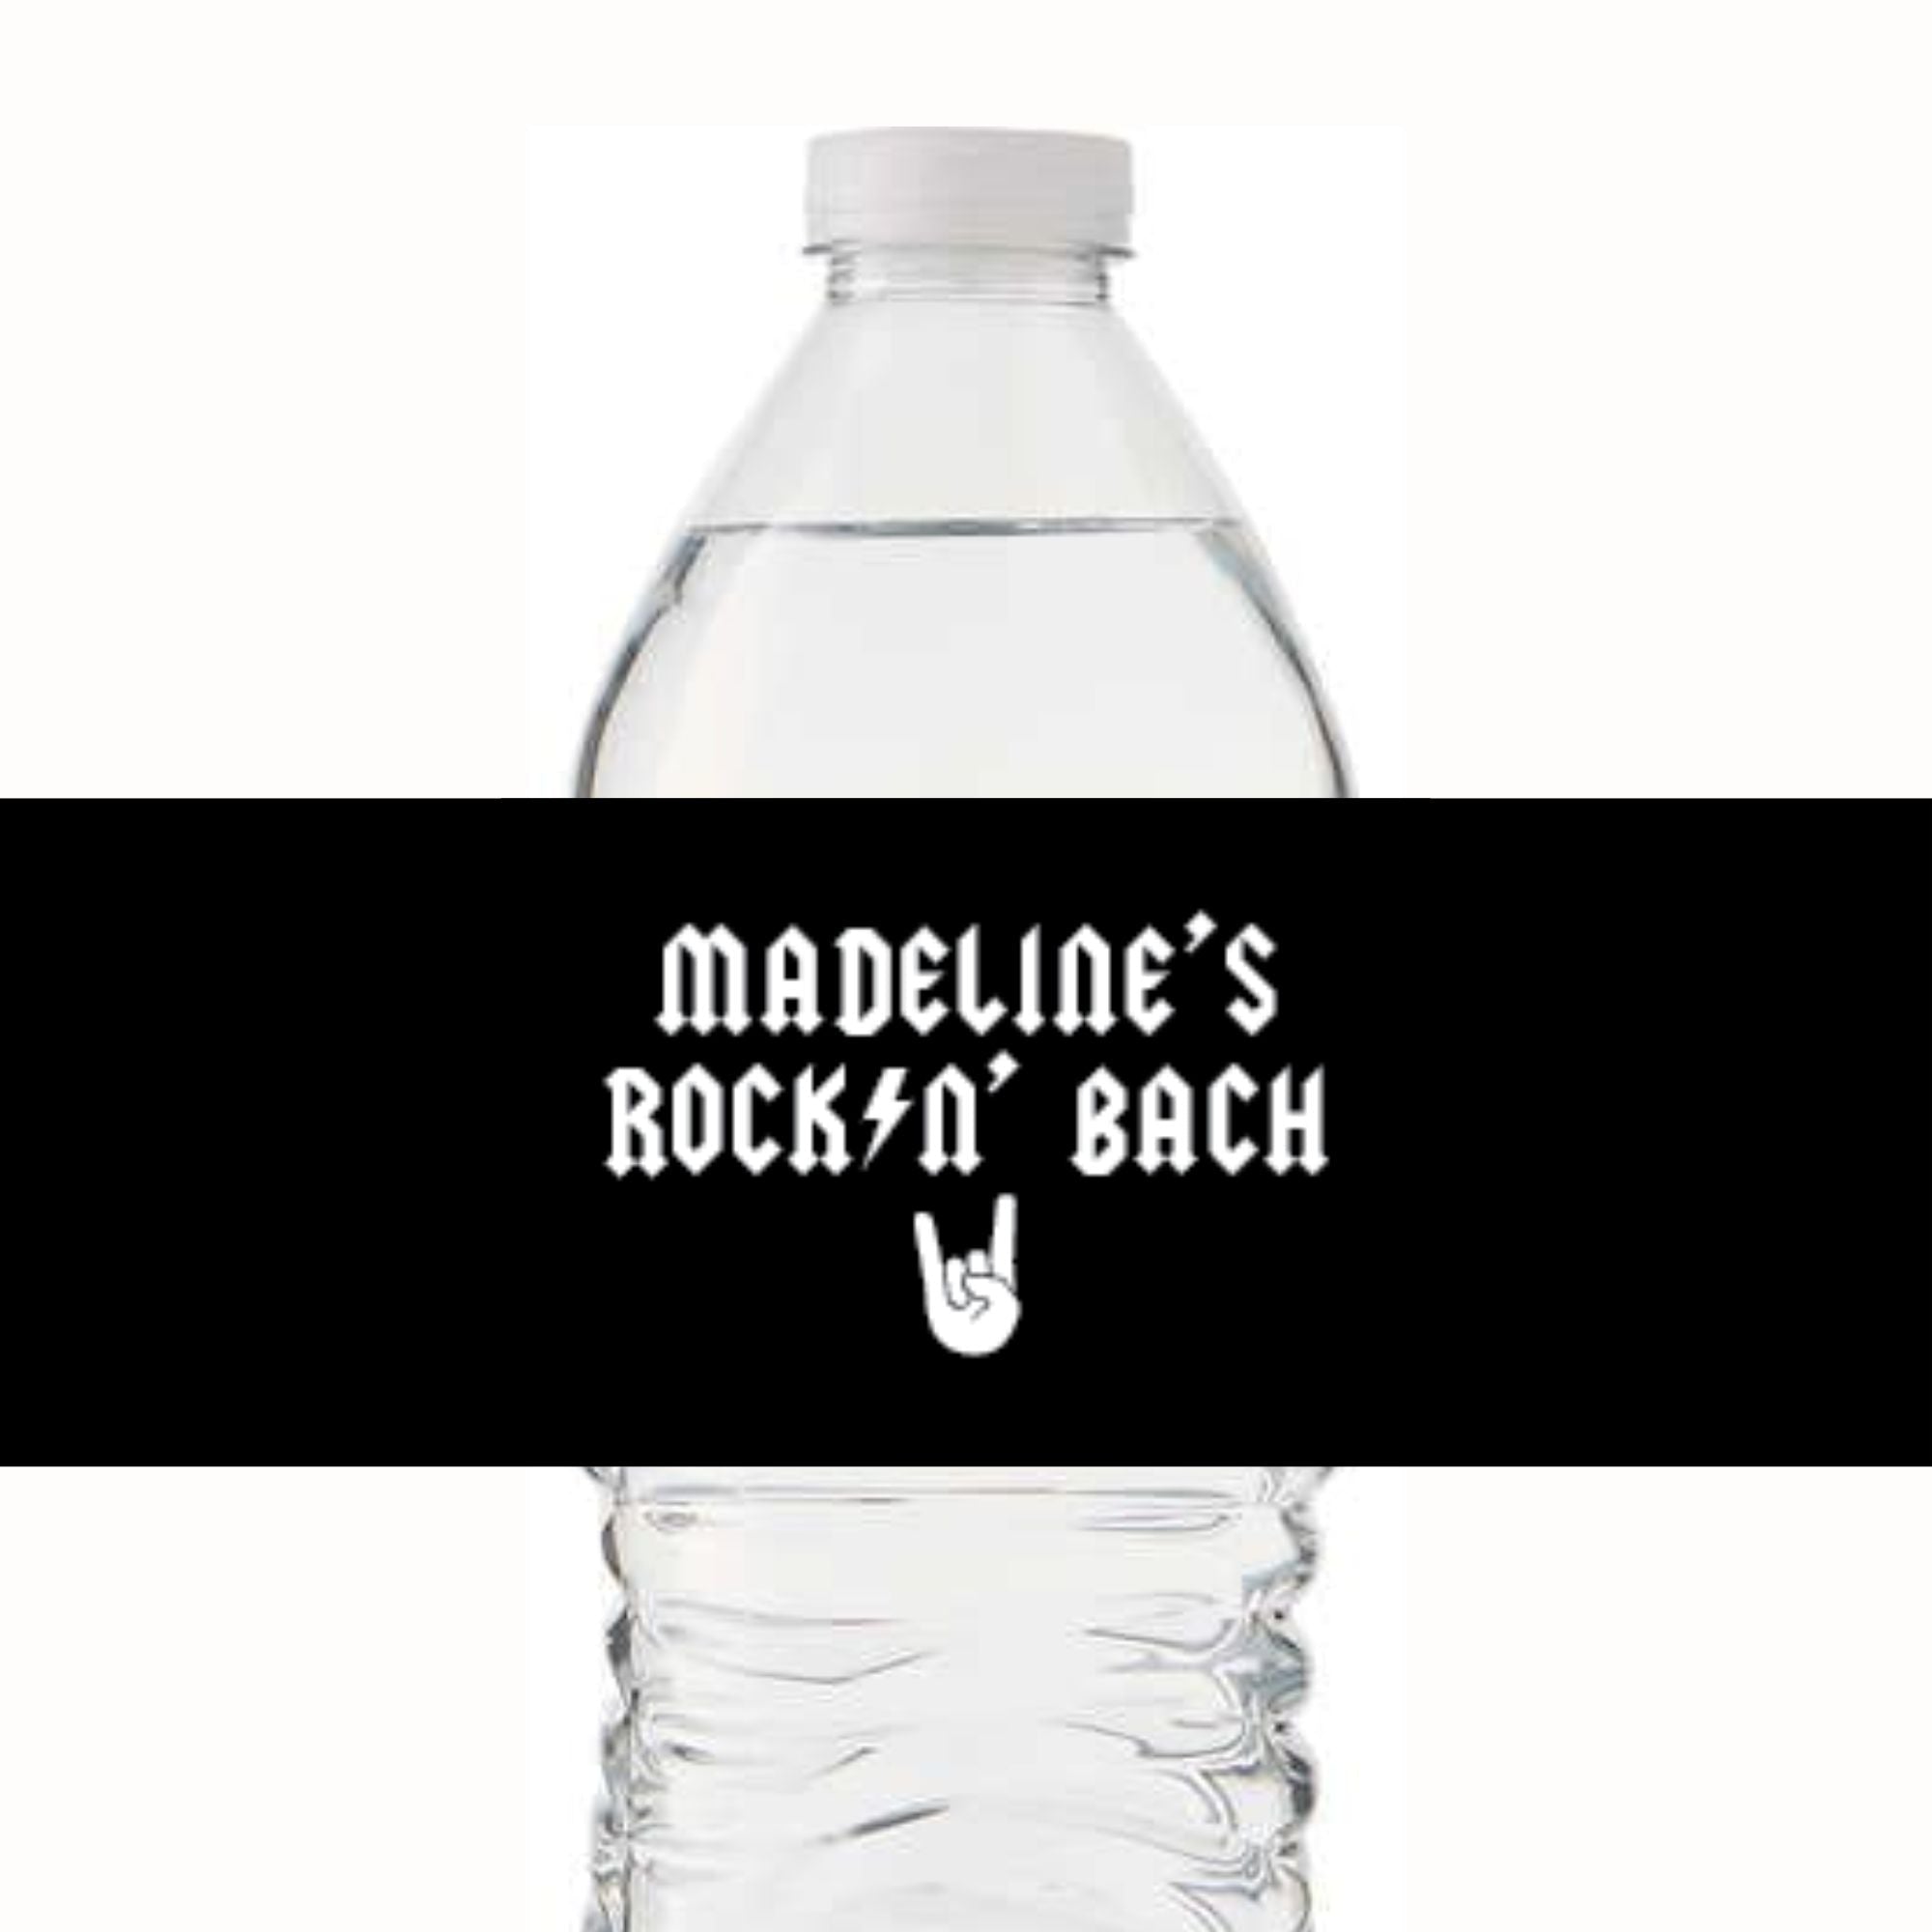 Rockin' Bach Water Bottle Label (Set of 10) - Sprinkled With Pink #bachelorette #custom #gifts